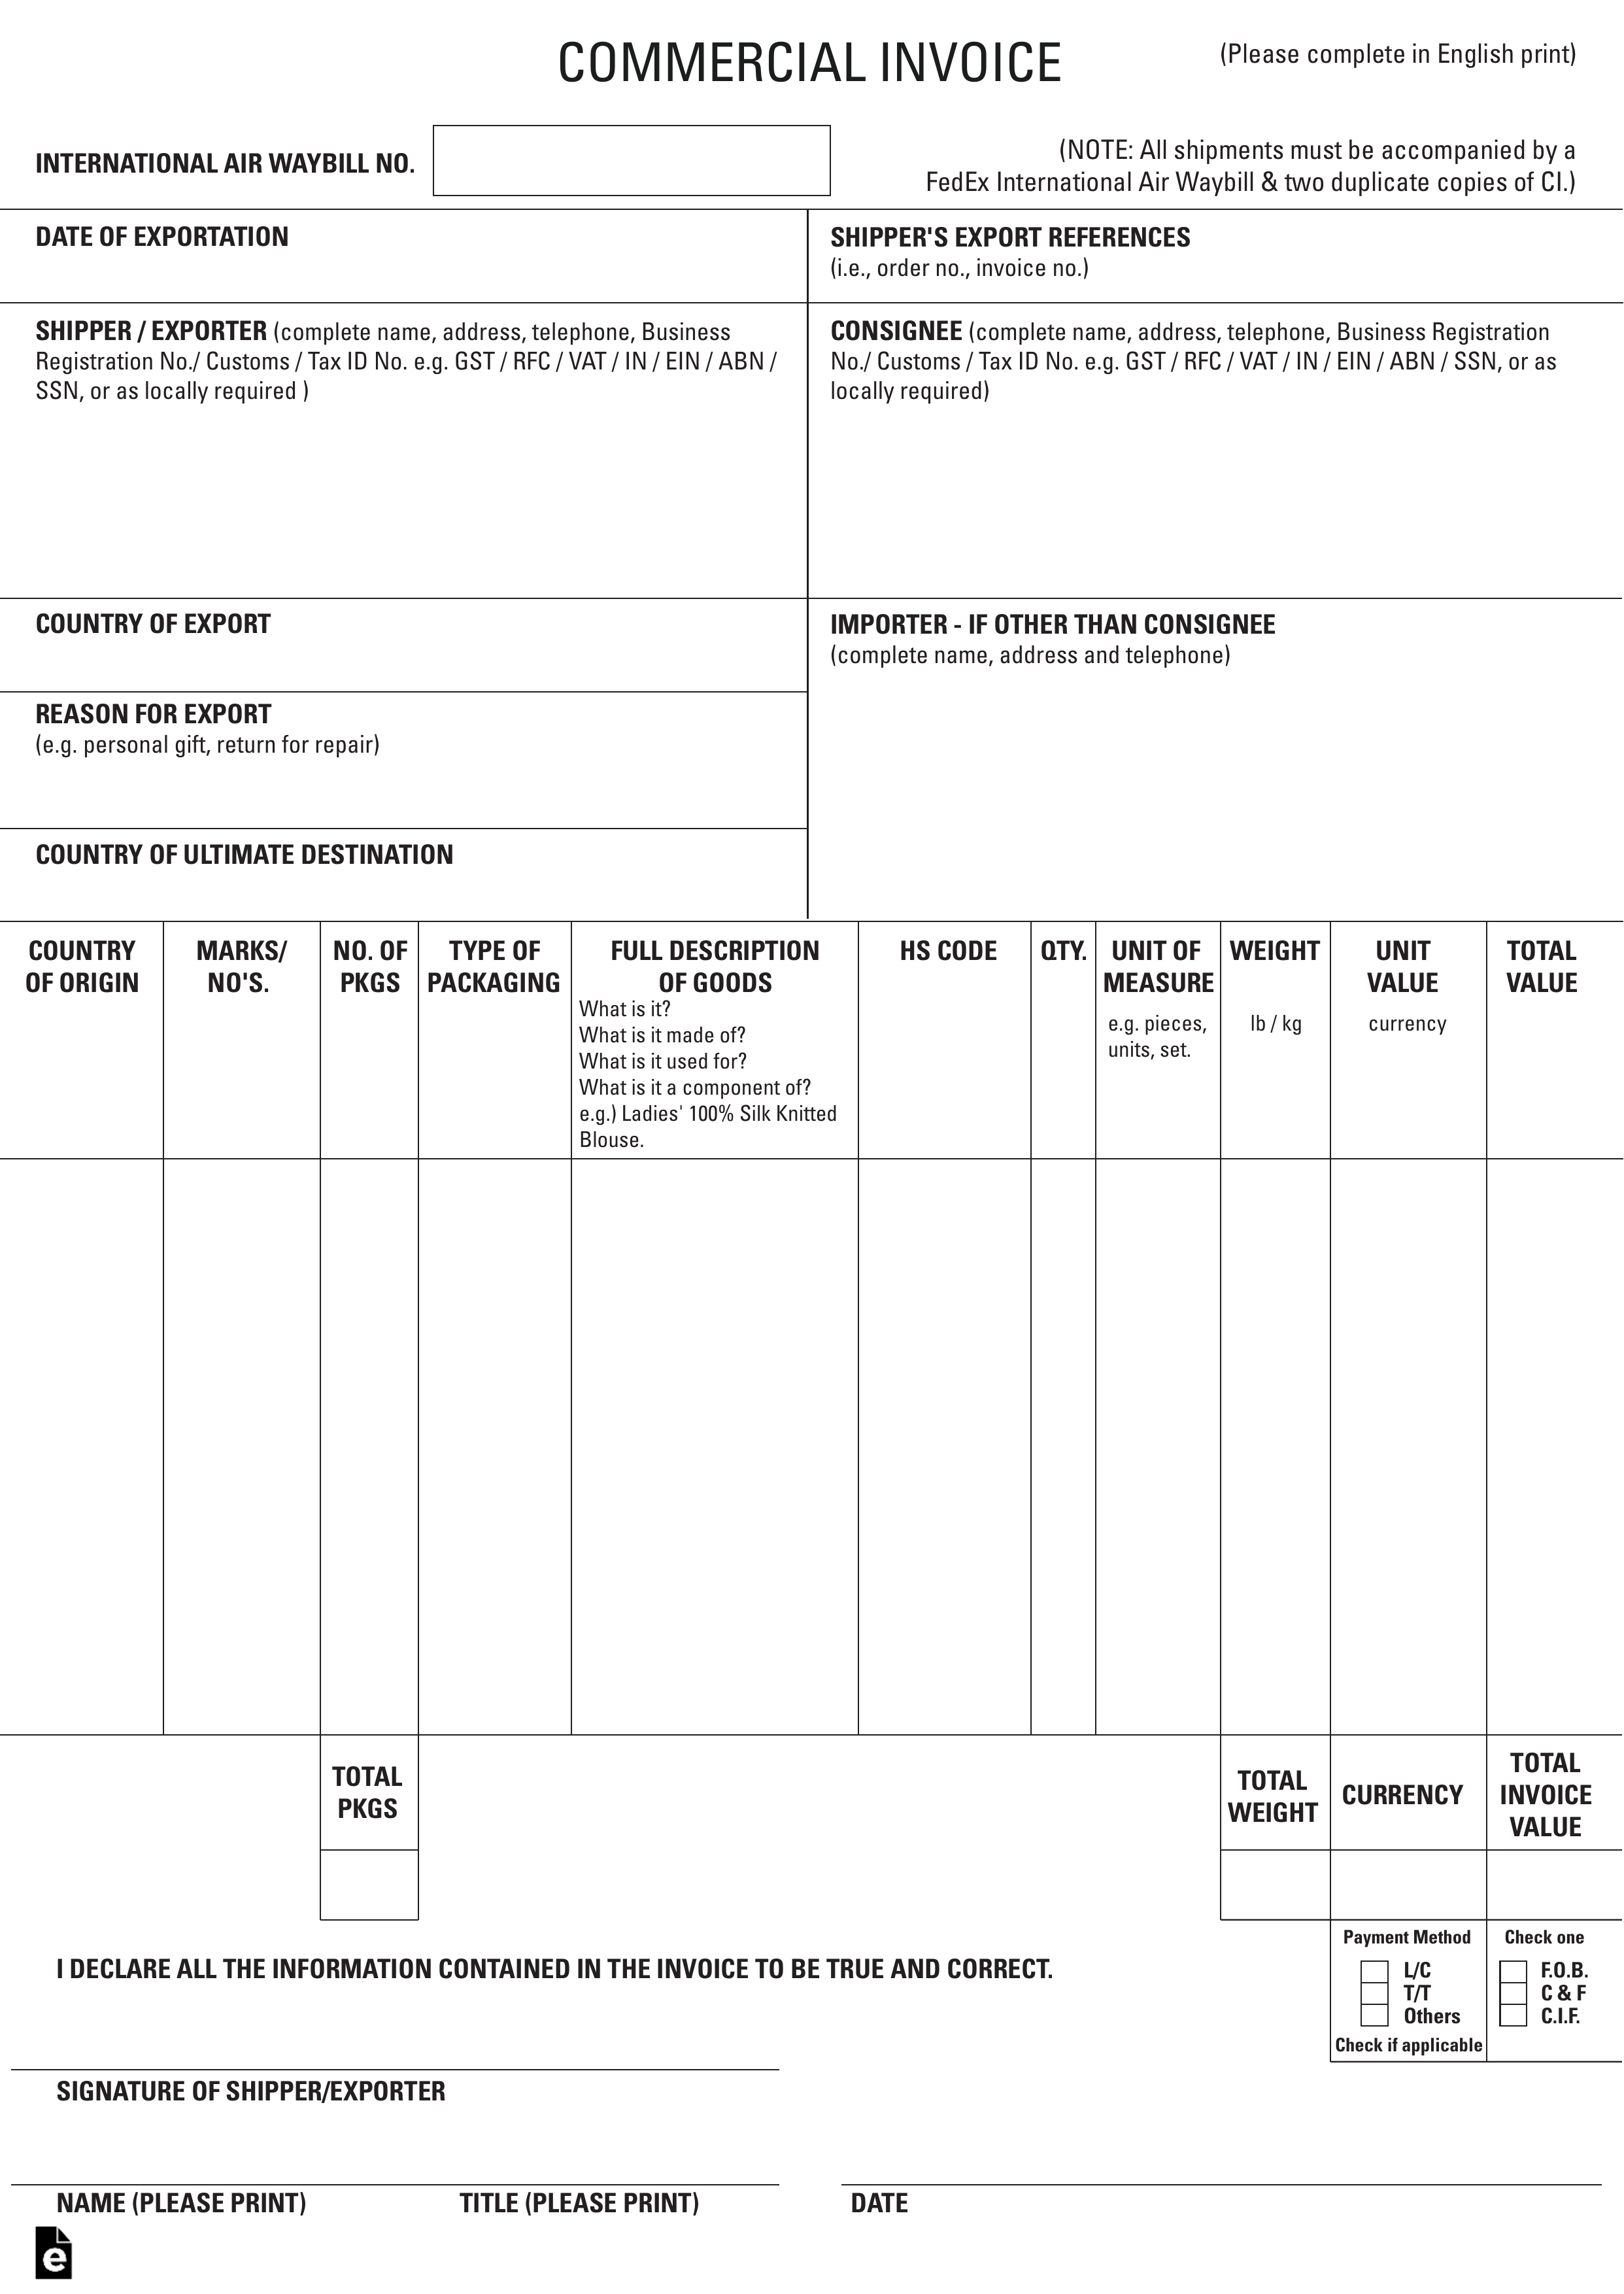 free international commercial invoice templates pdf model export commercial invoive